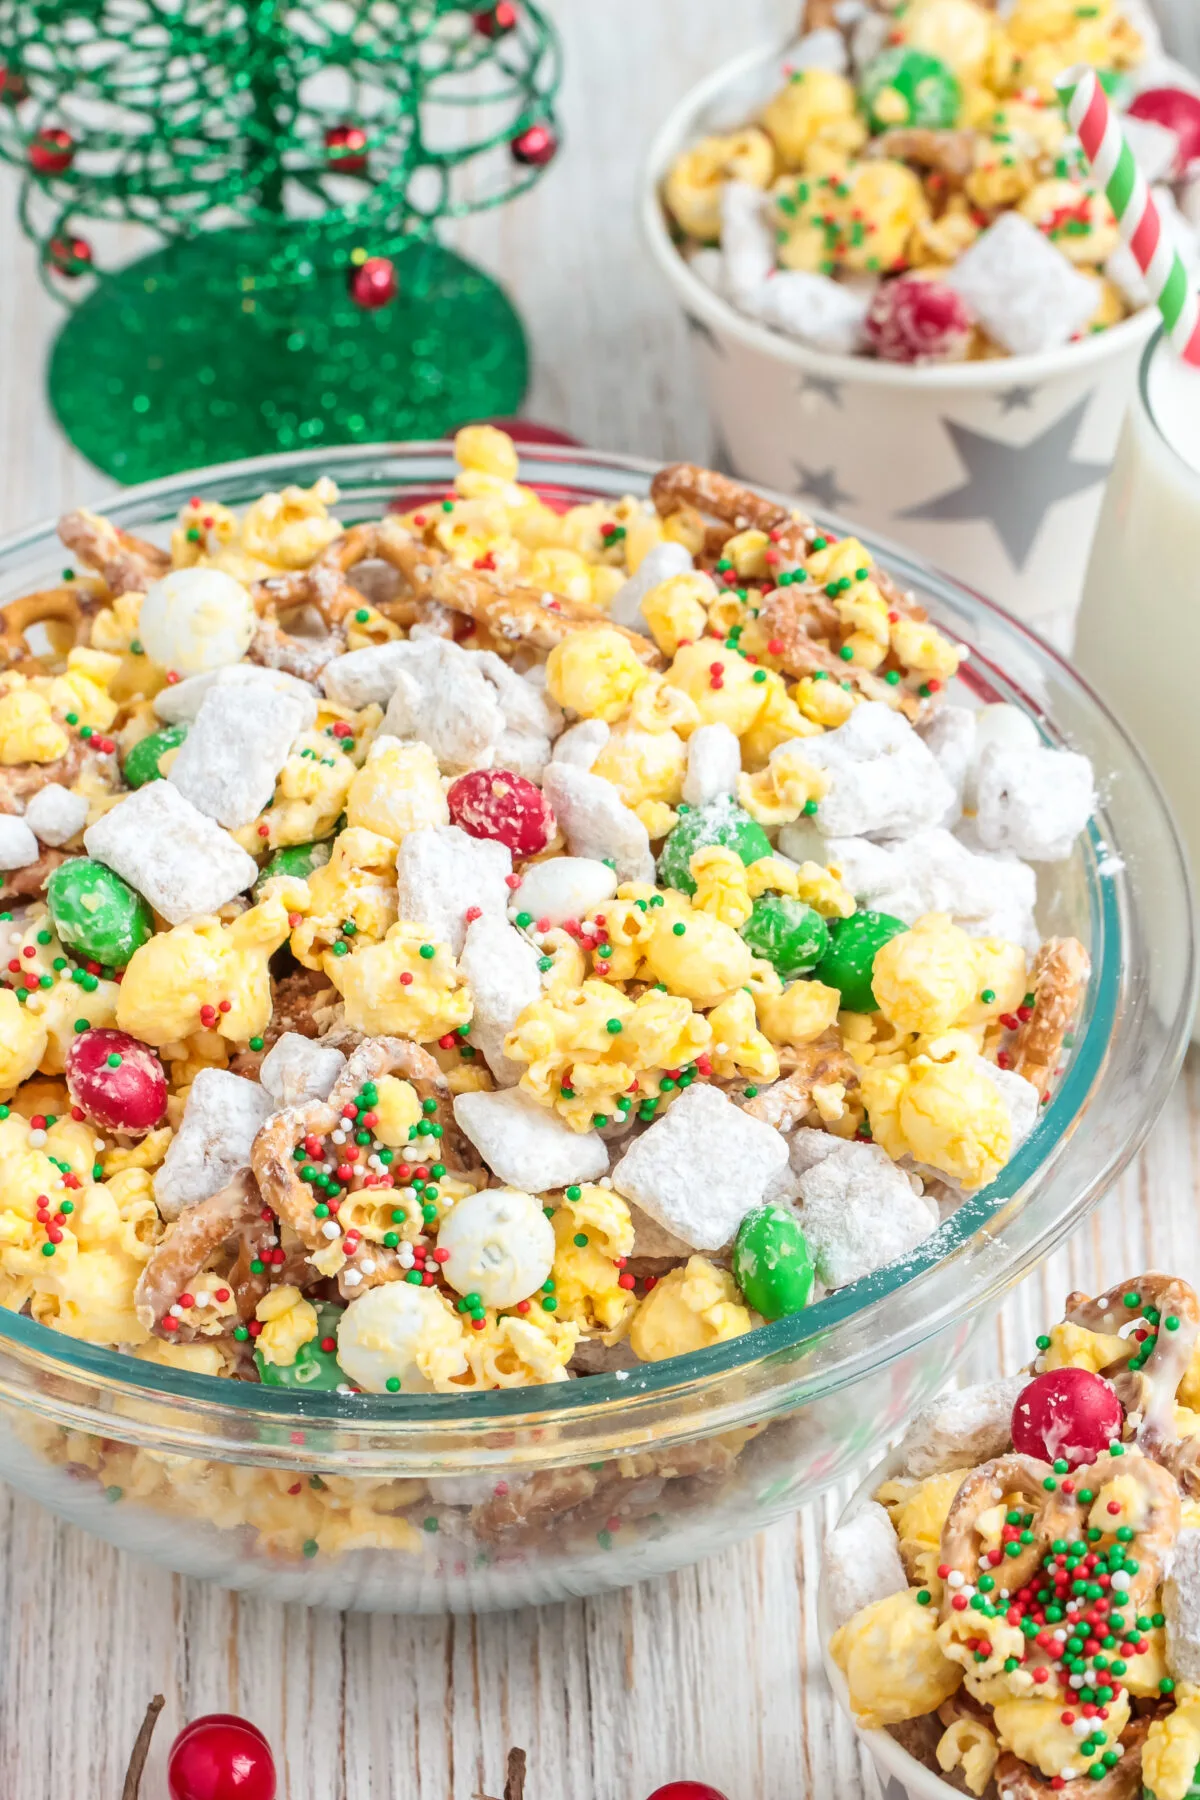 This easy reindeer bait recipe is a family holiday tradition, and it's one of our favourite Christmas treats. It's festive and delicious!